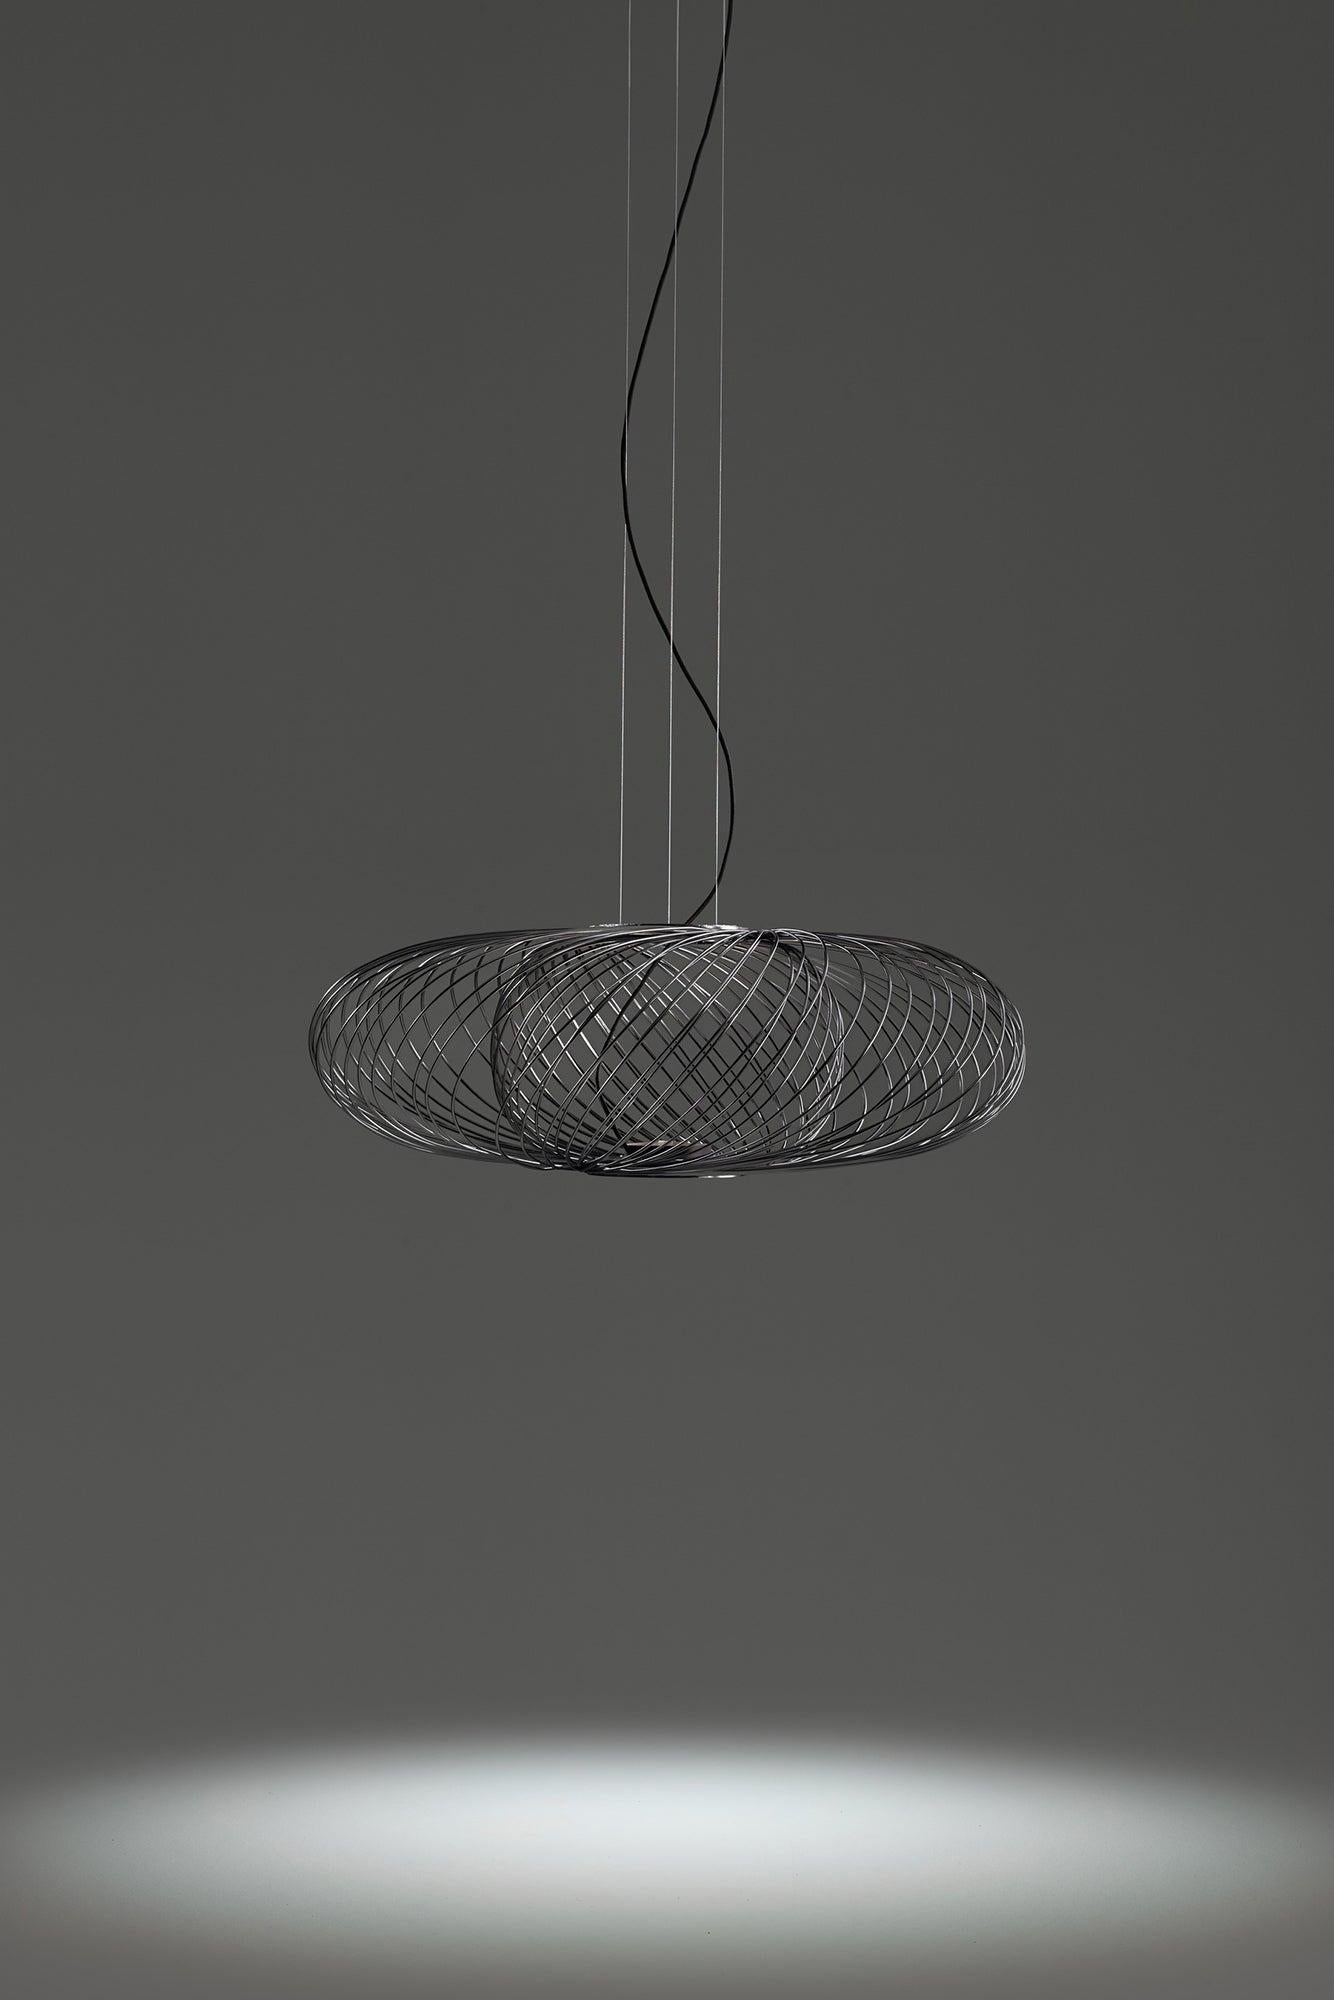 Anwar T 30


Suspension lamp, model Anwar T 30, designed by Stephen Burks in 2013. 
Manufactured by Parachilna. 

Each structure is composed by nearly 100 steel rods welded one by one. It’s an artisanal lamp that reminds traditional wicker baskets.